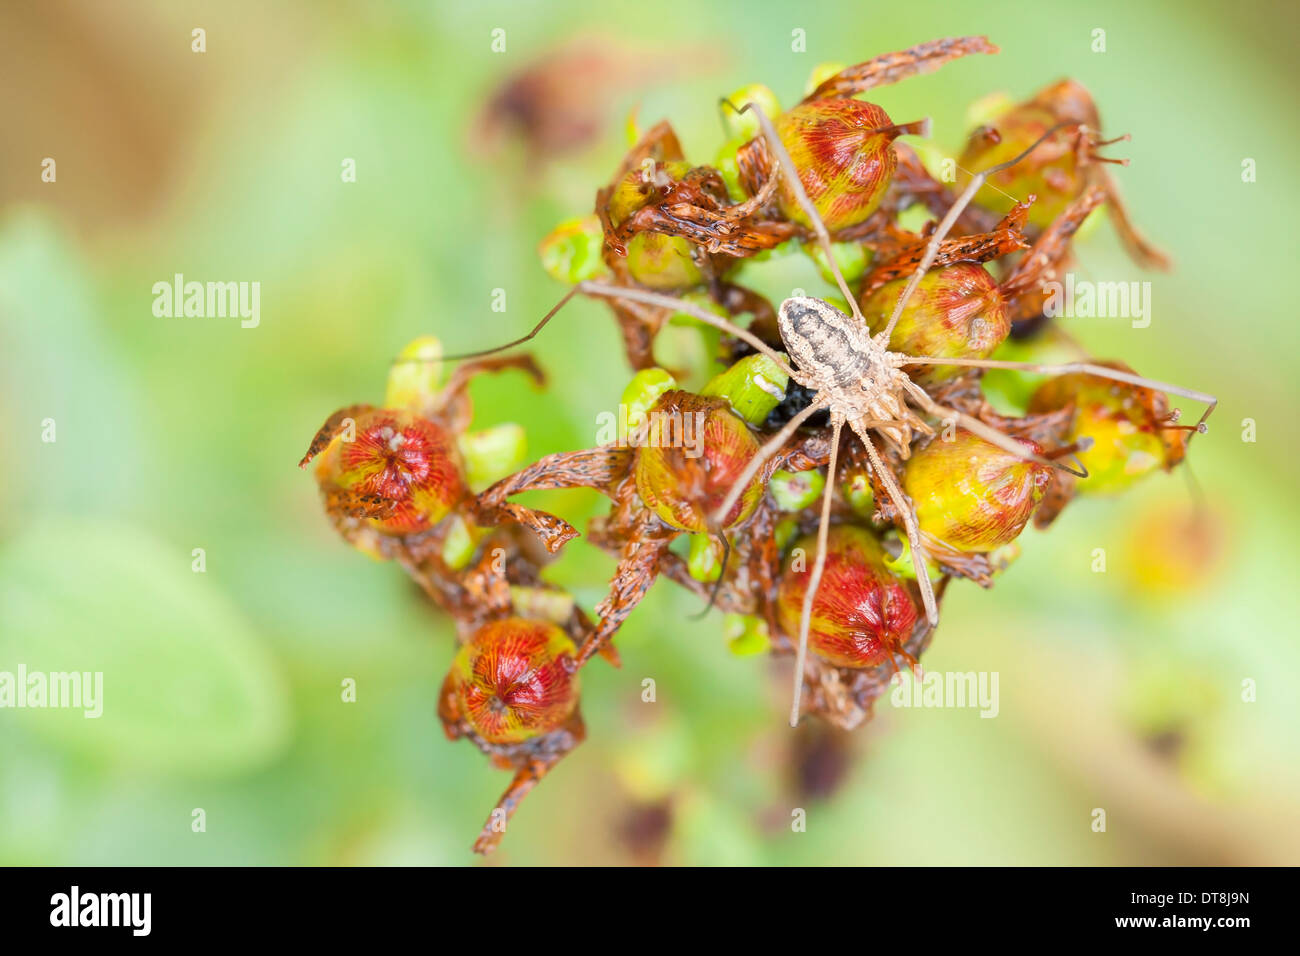 Closeup of a white or slightly yellowish spider on top of a plant Stock Photo